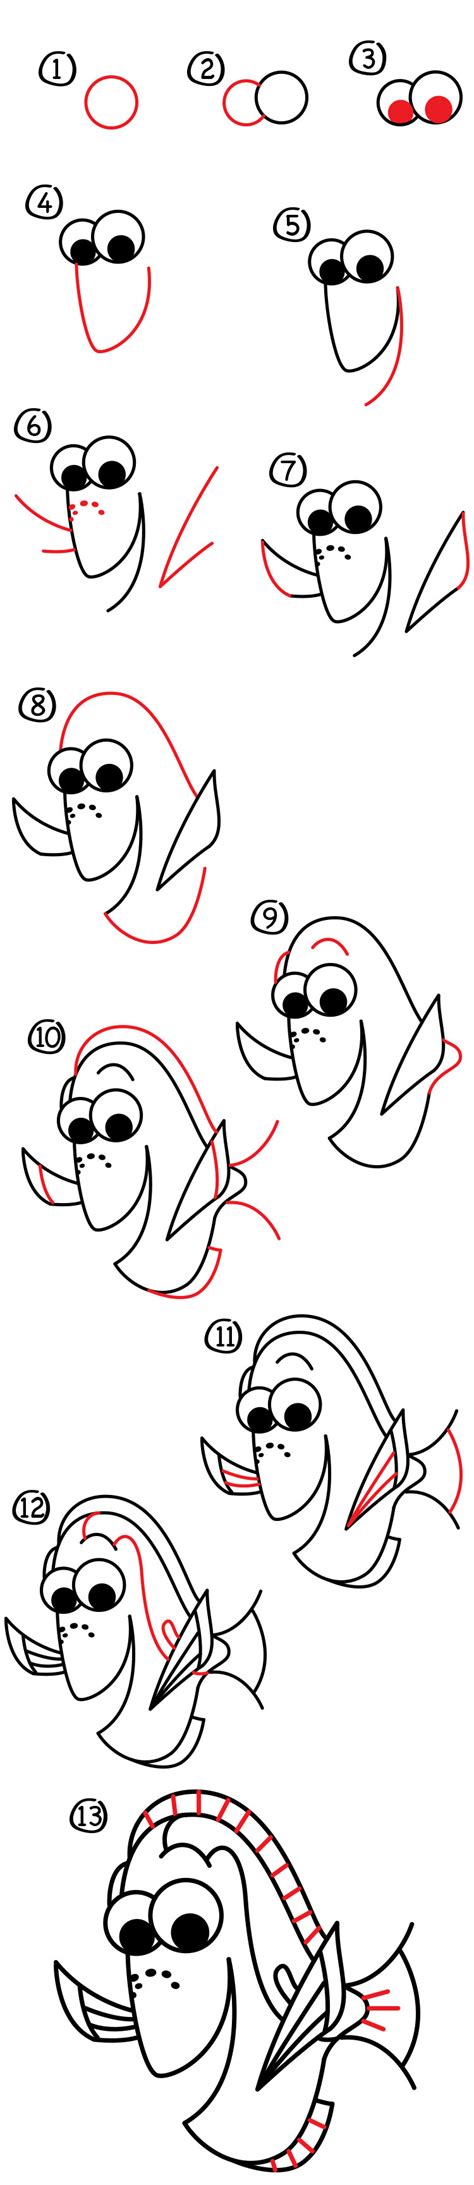 How To Draw Nemo Step By Step How To Draw Dory Dale Sylvia